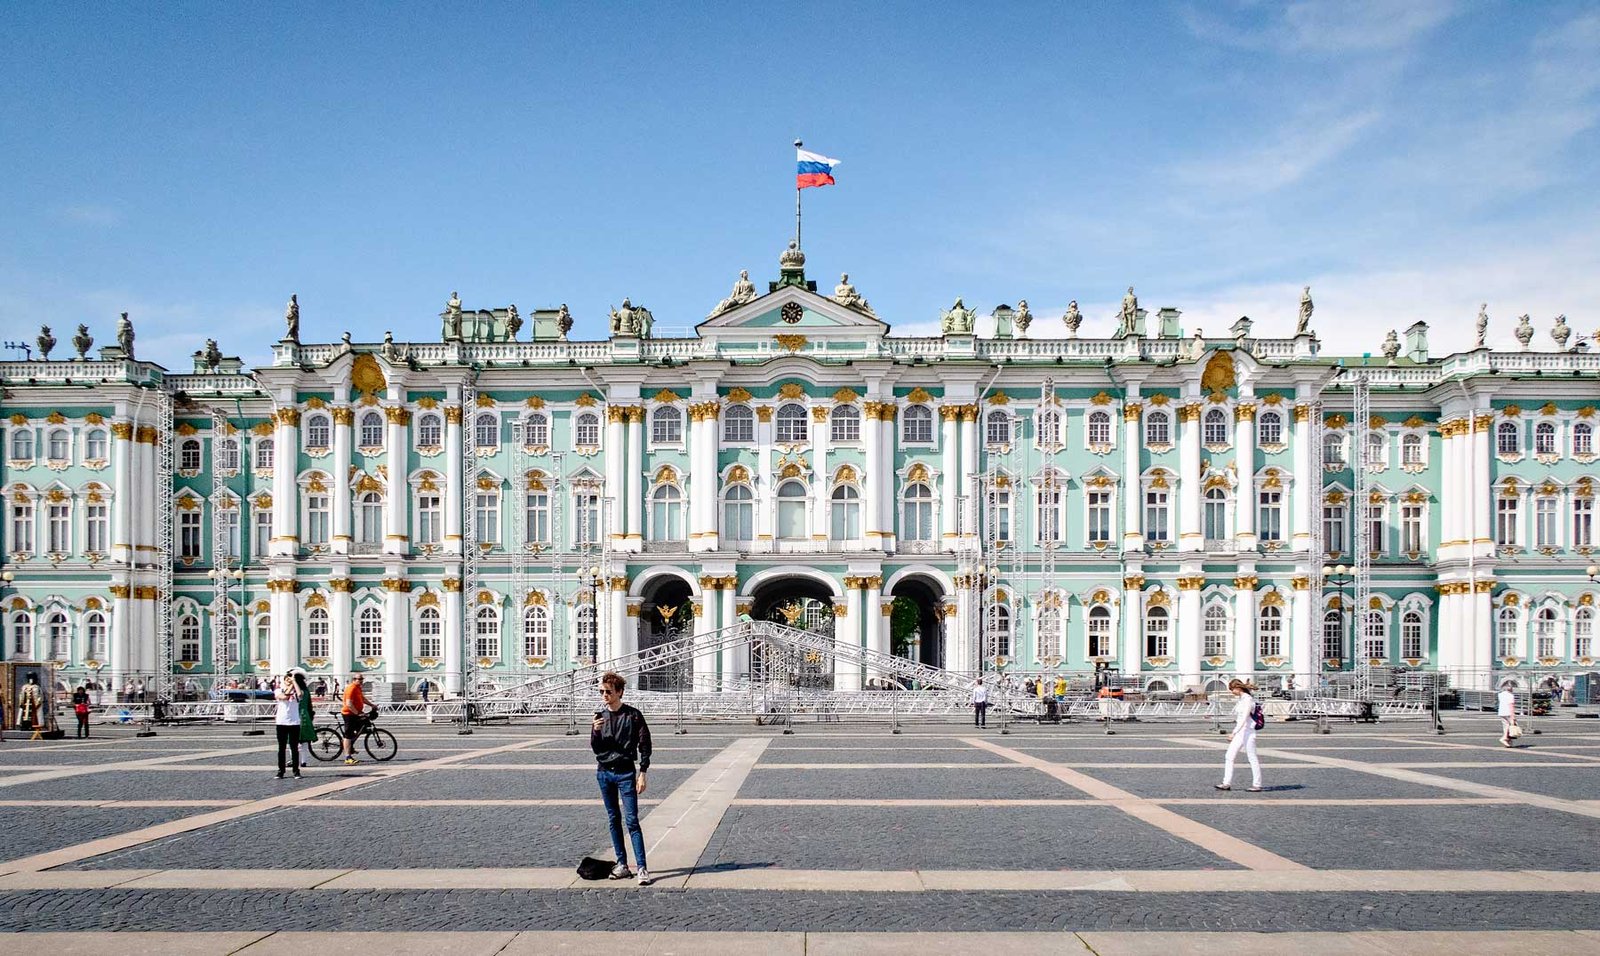 St Petersburg Guide (Part 1): First Impressions & Getting a Russian Visa